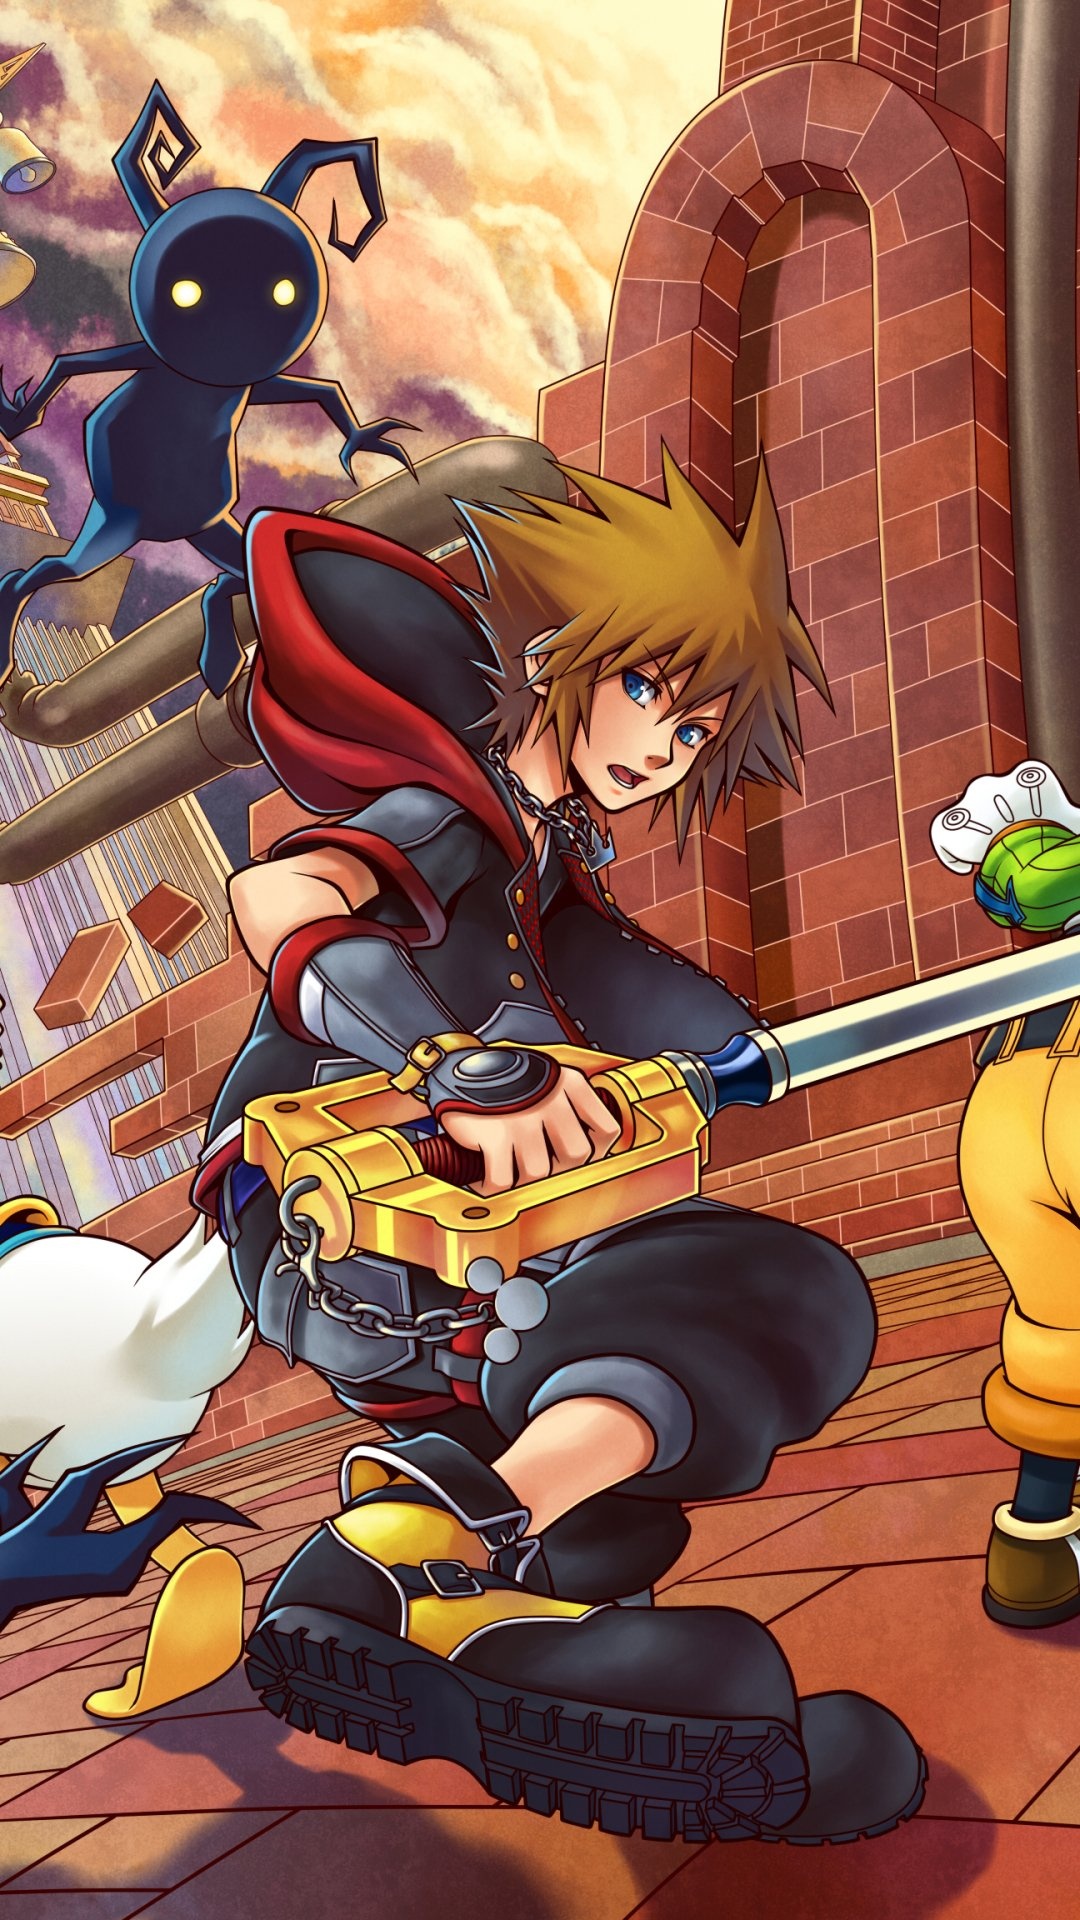 Kingdom Hearts III, Video game adventure, Exciting gameplay, Epic battles, 1080x1920 Full HD Phone